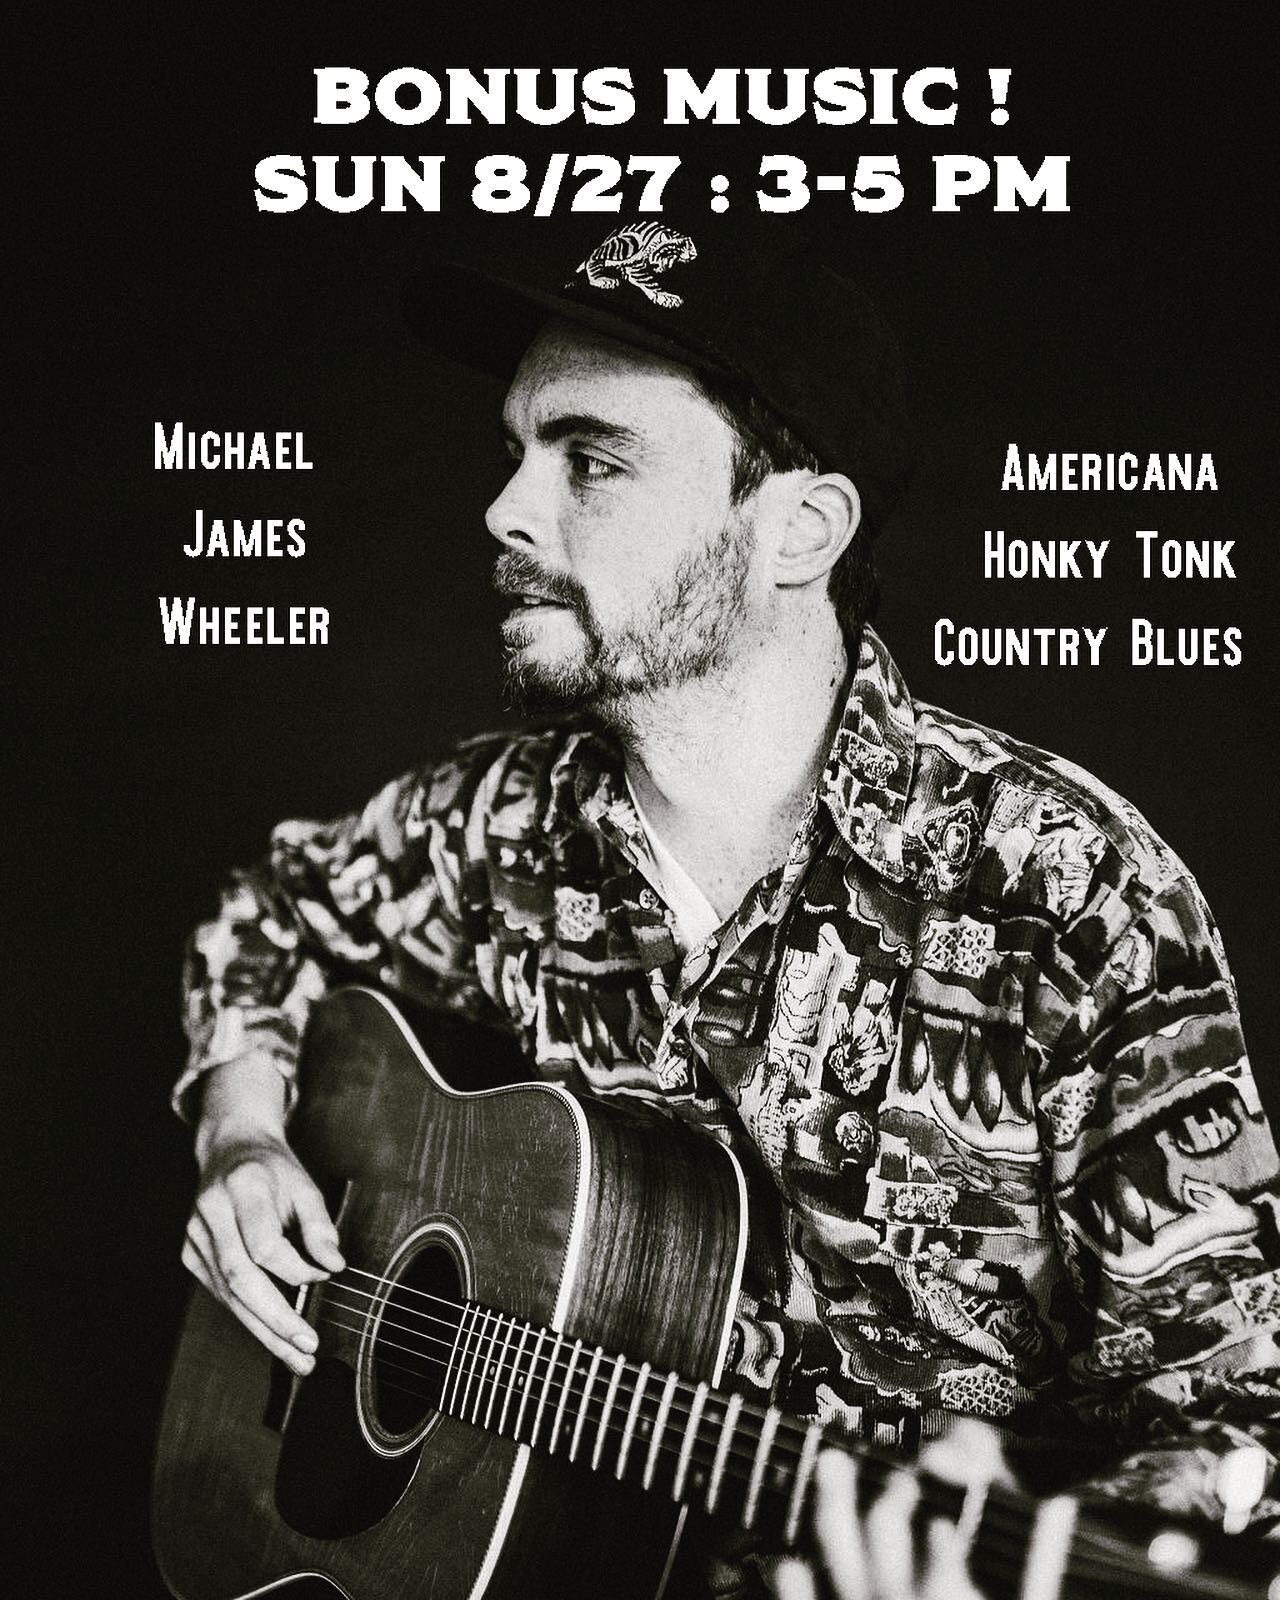 On Sunday we welcome to the stage our longtime friend, Michael James Wheeler, for a little end of week set. 

From VT, to Nashville, back to VT, we are overly joyed to have him strum it up on Sunday from 3-5. 

Come out for some brews, eats, and a to